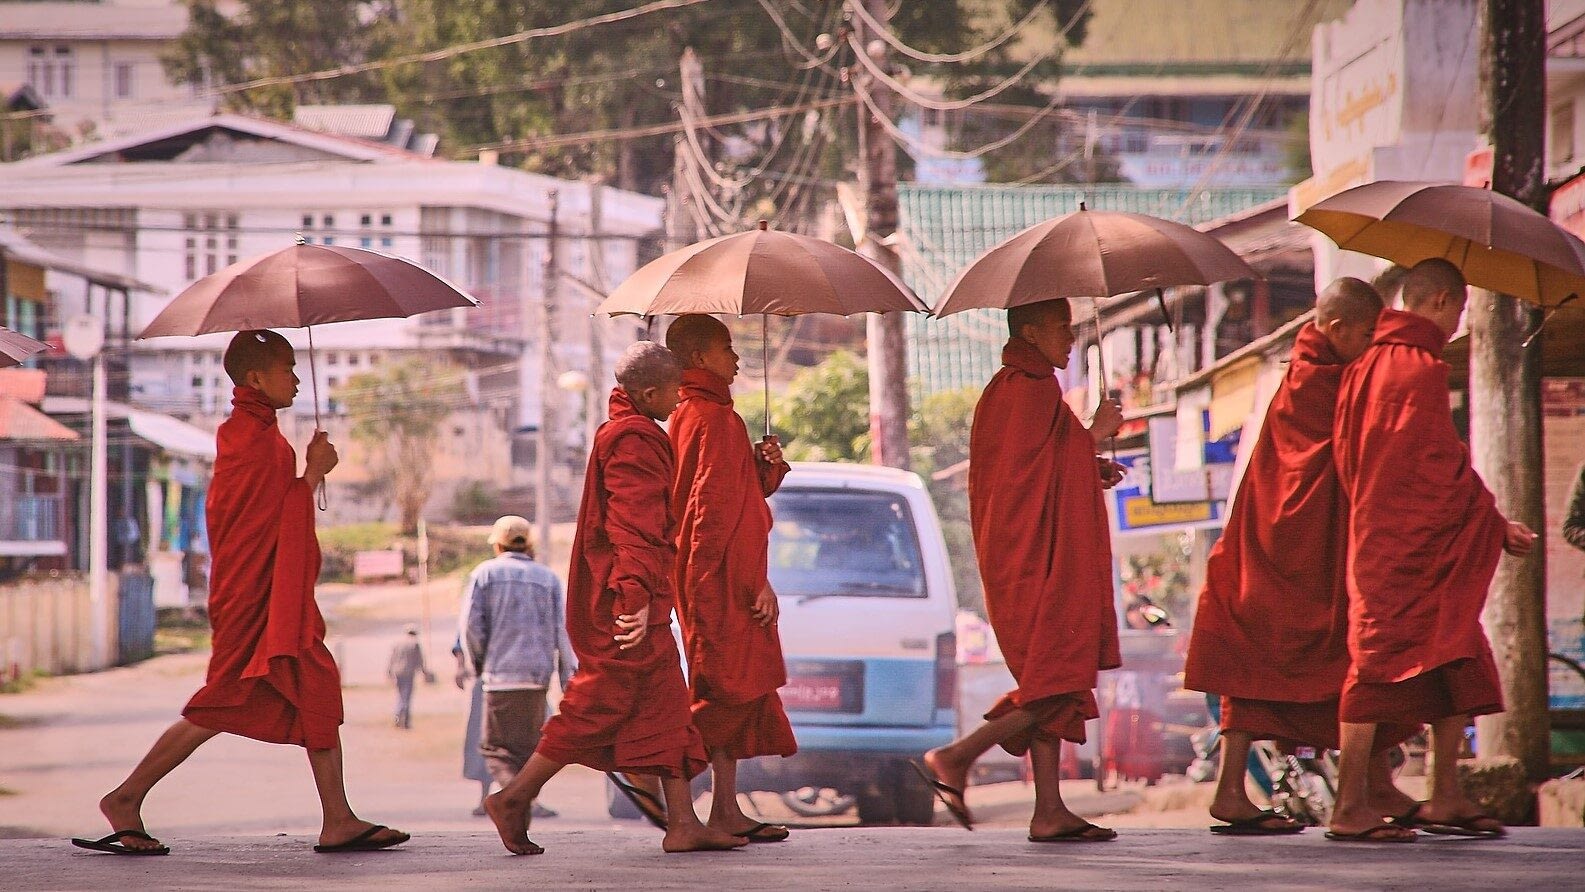 Image: Young monks wearing orange robes crossing the road with umbrellas